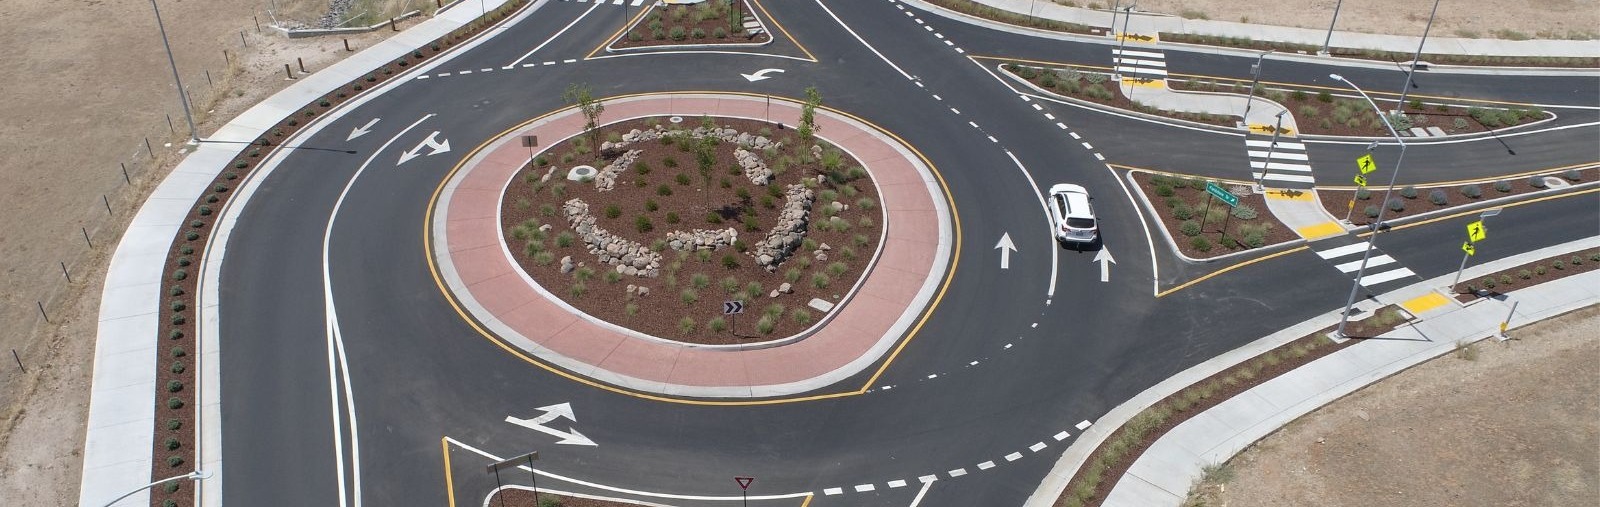 image of completed east joiner parkway roundabout